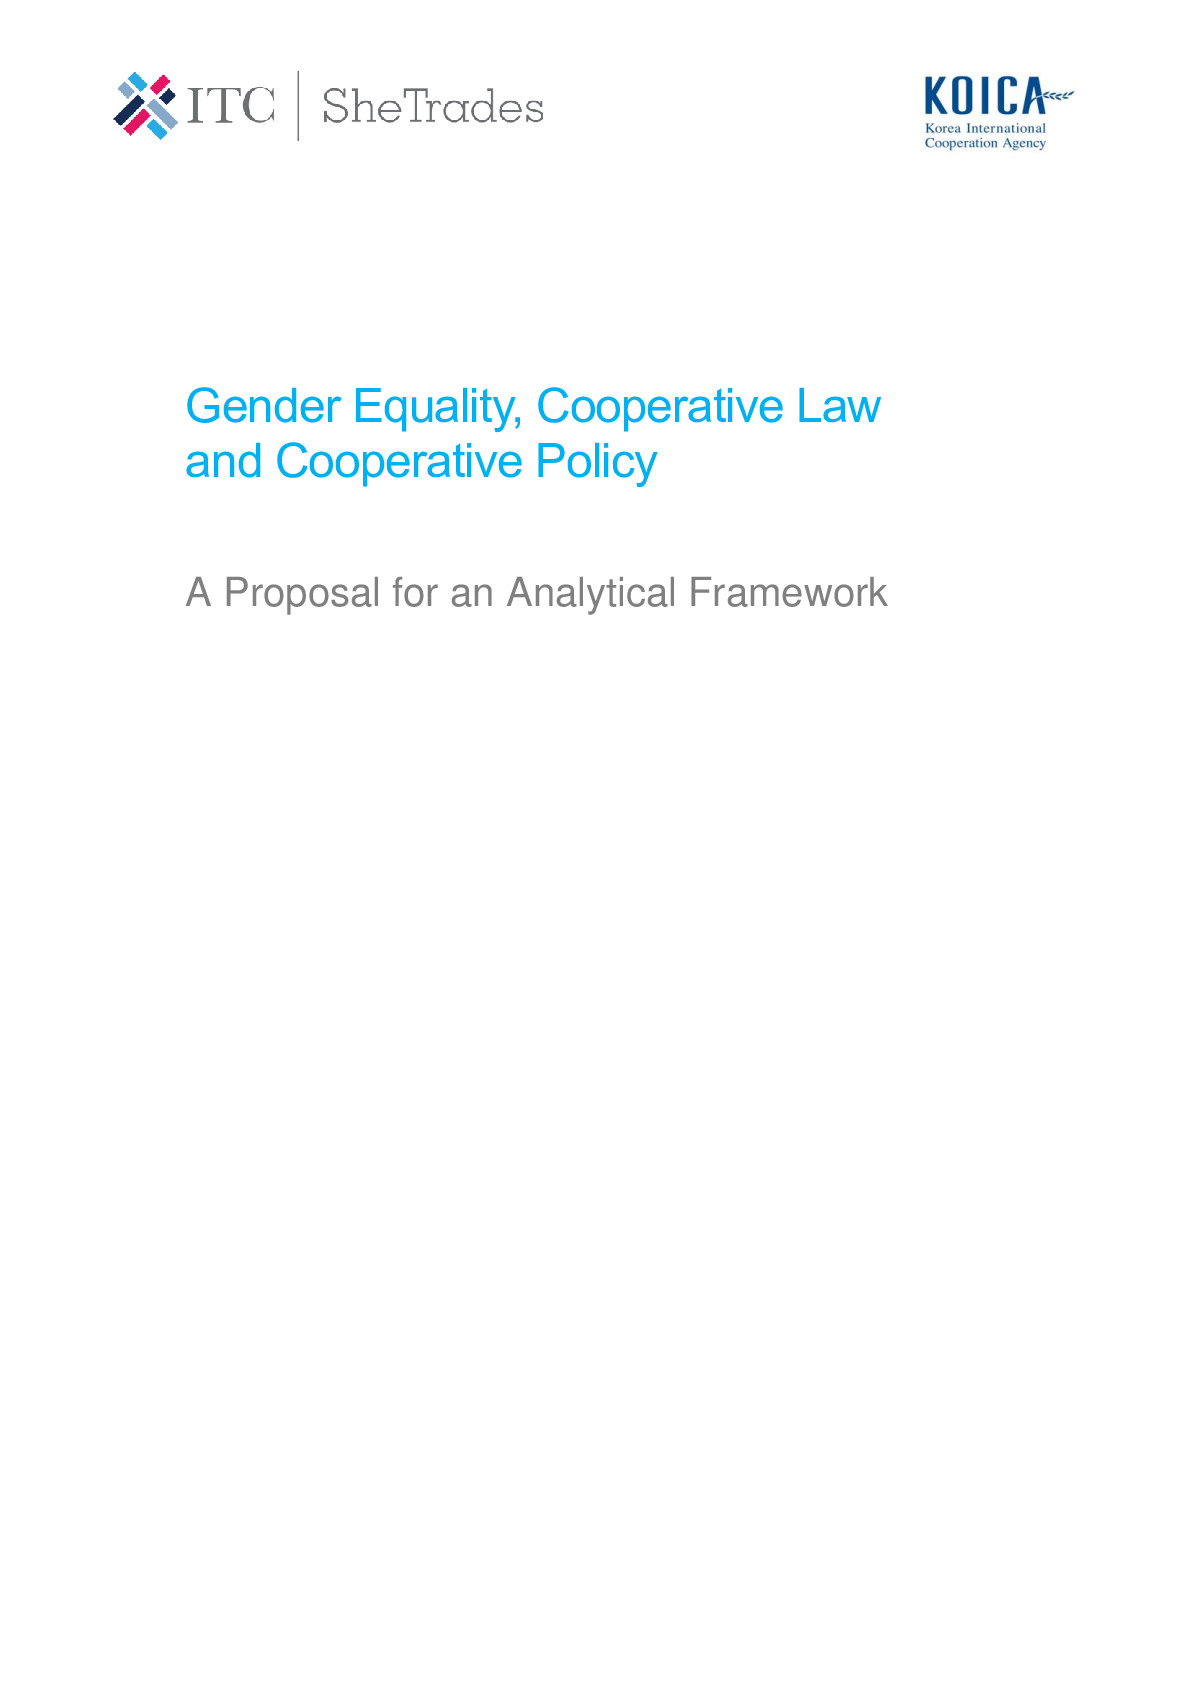 gender_equality_cooperative_law_and_cooperative_policy_a_proposal_for_an_analytical_framework_-_en_